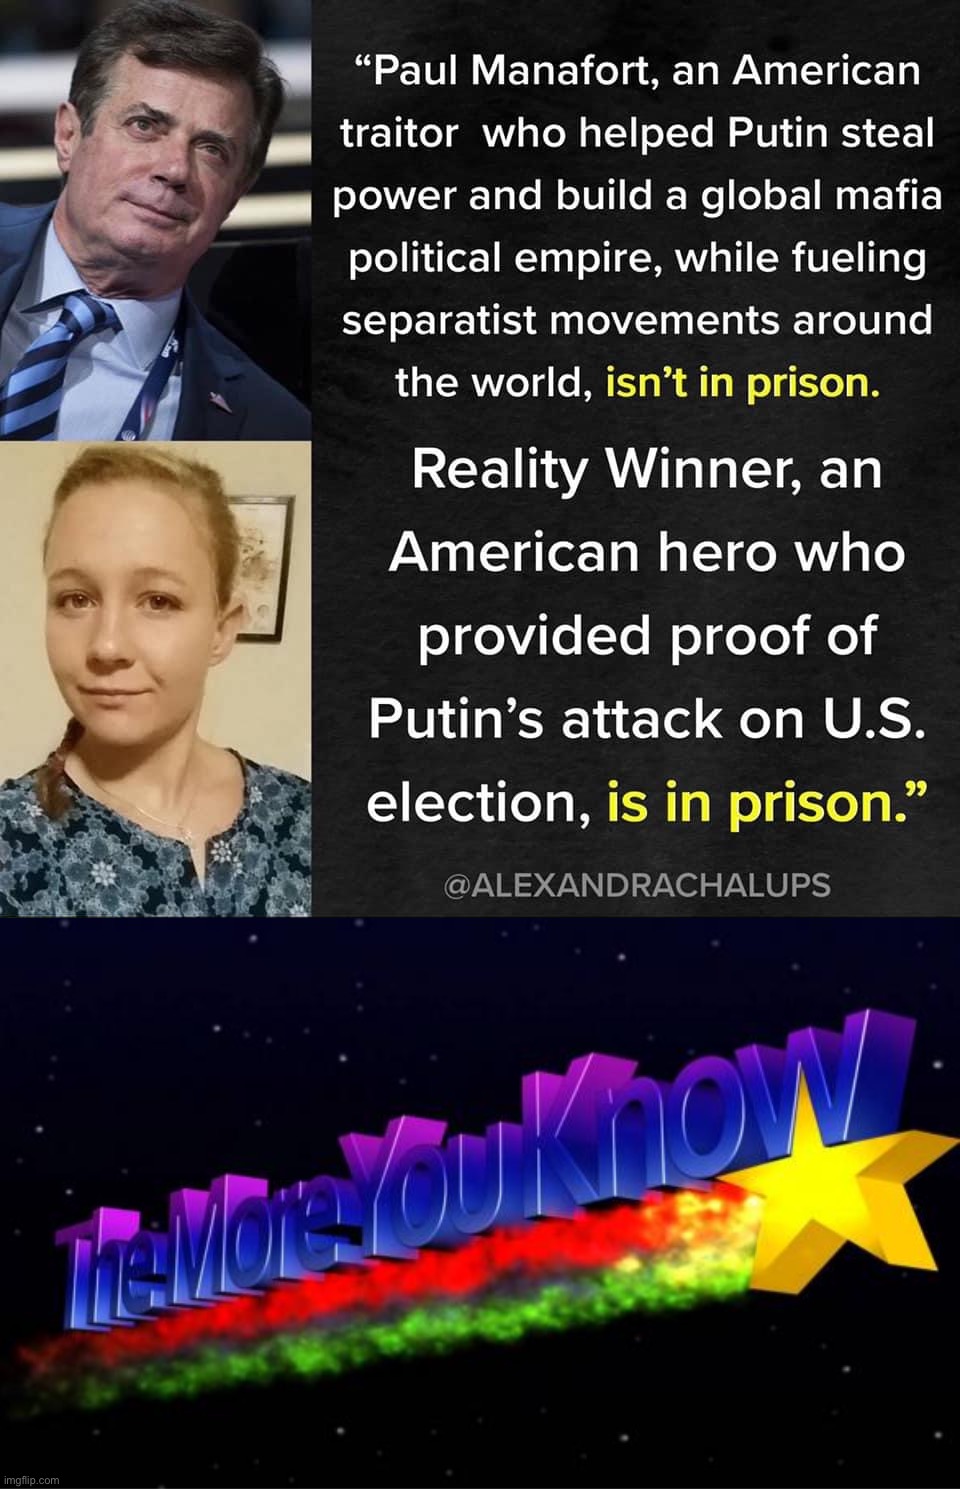 Duh! That’s because “Reality Winner” (lol!) is a TRAITOR who LEAKED so-called “evidence” to the fake news media! #MAGA #Traitor | image tagged in russiagate hypocrisy,the more you know,liberal hypocrisy,russiagate,fake news,traitor | made w/ Imgflip meme maker